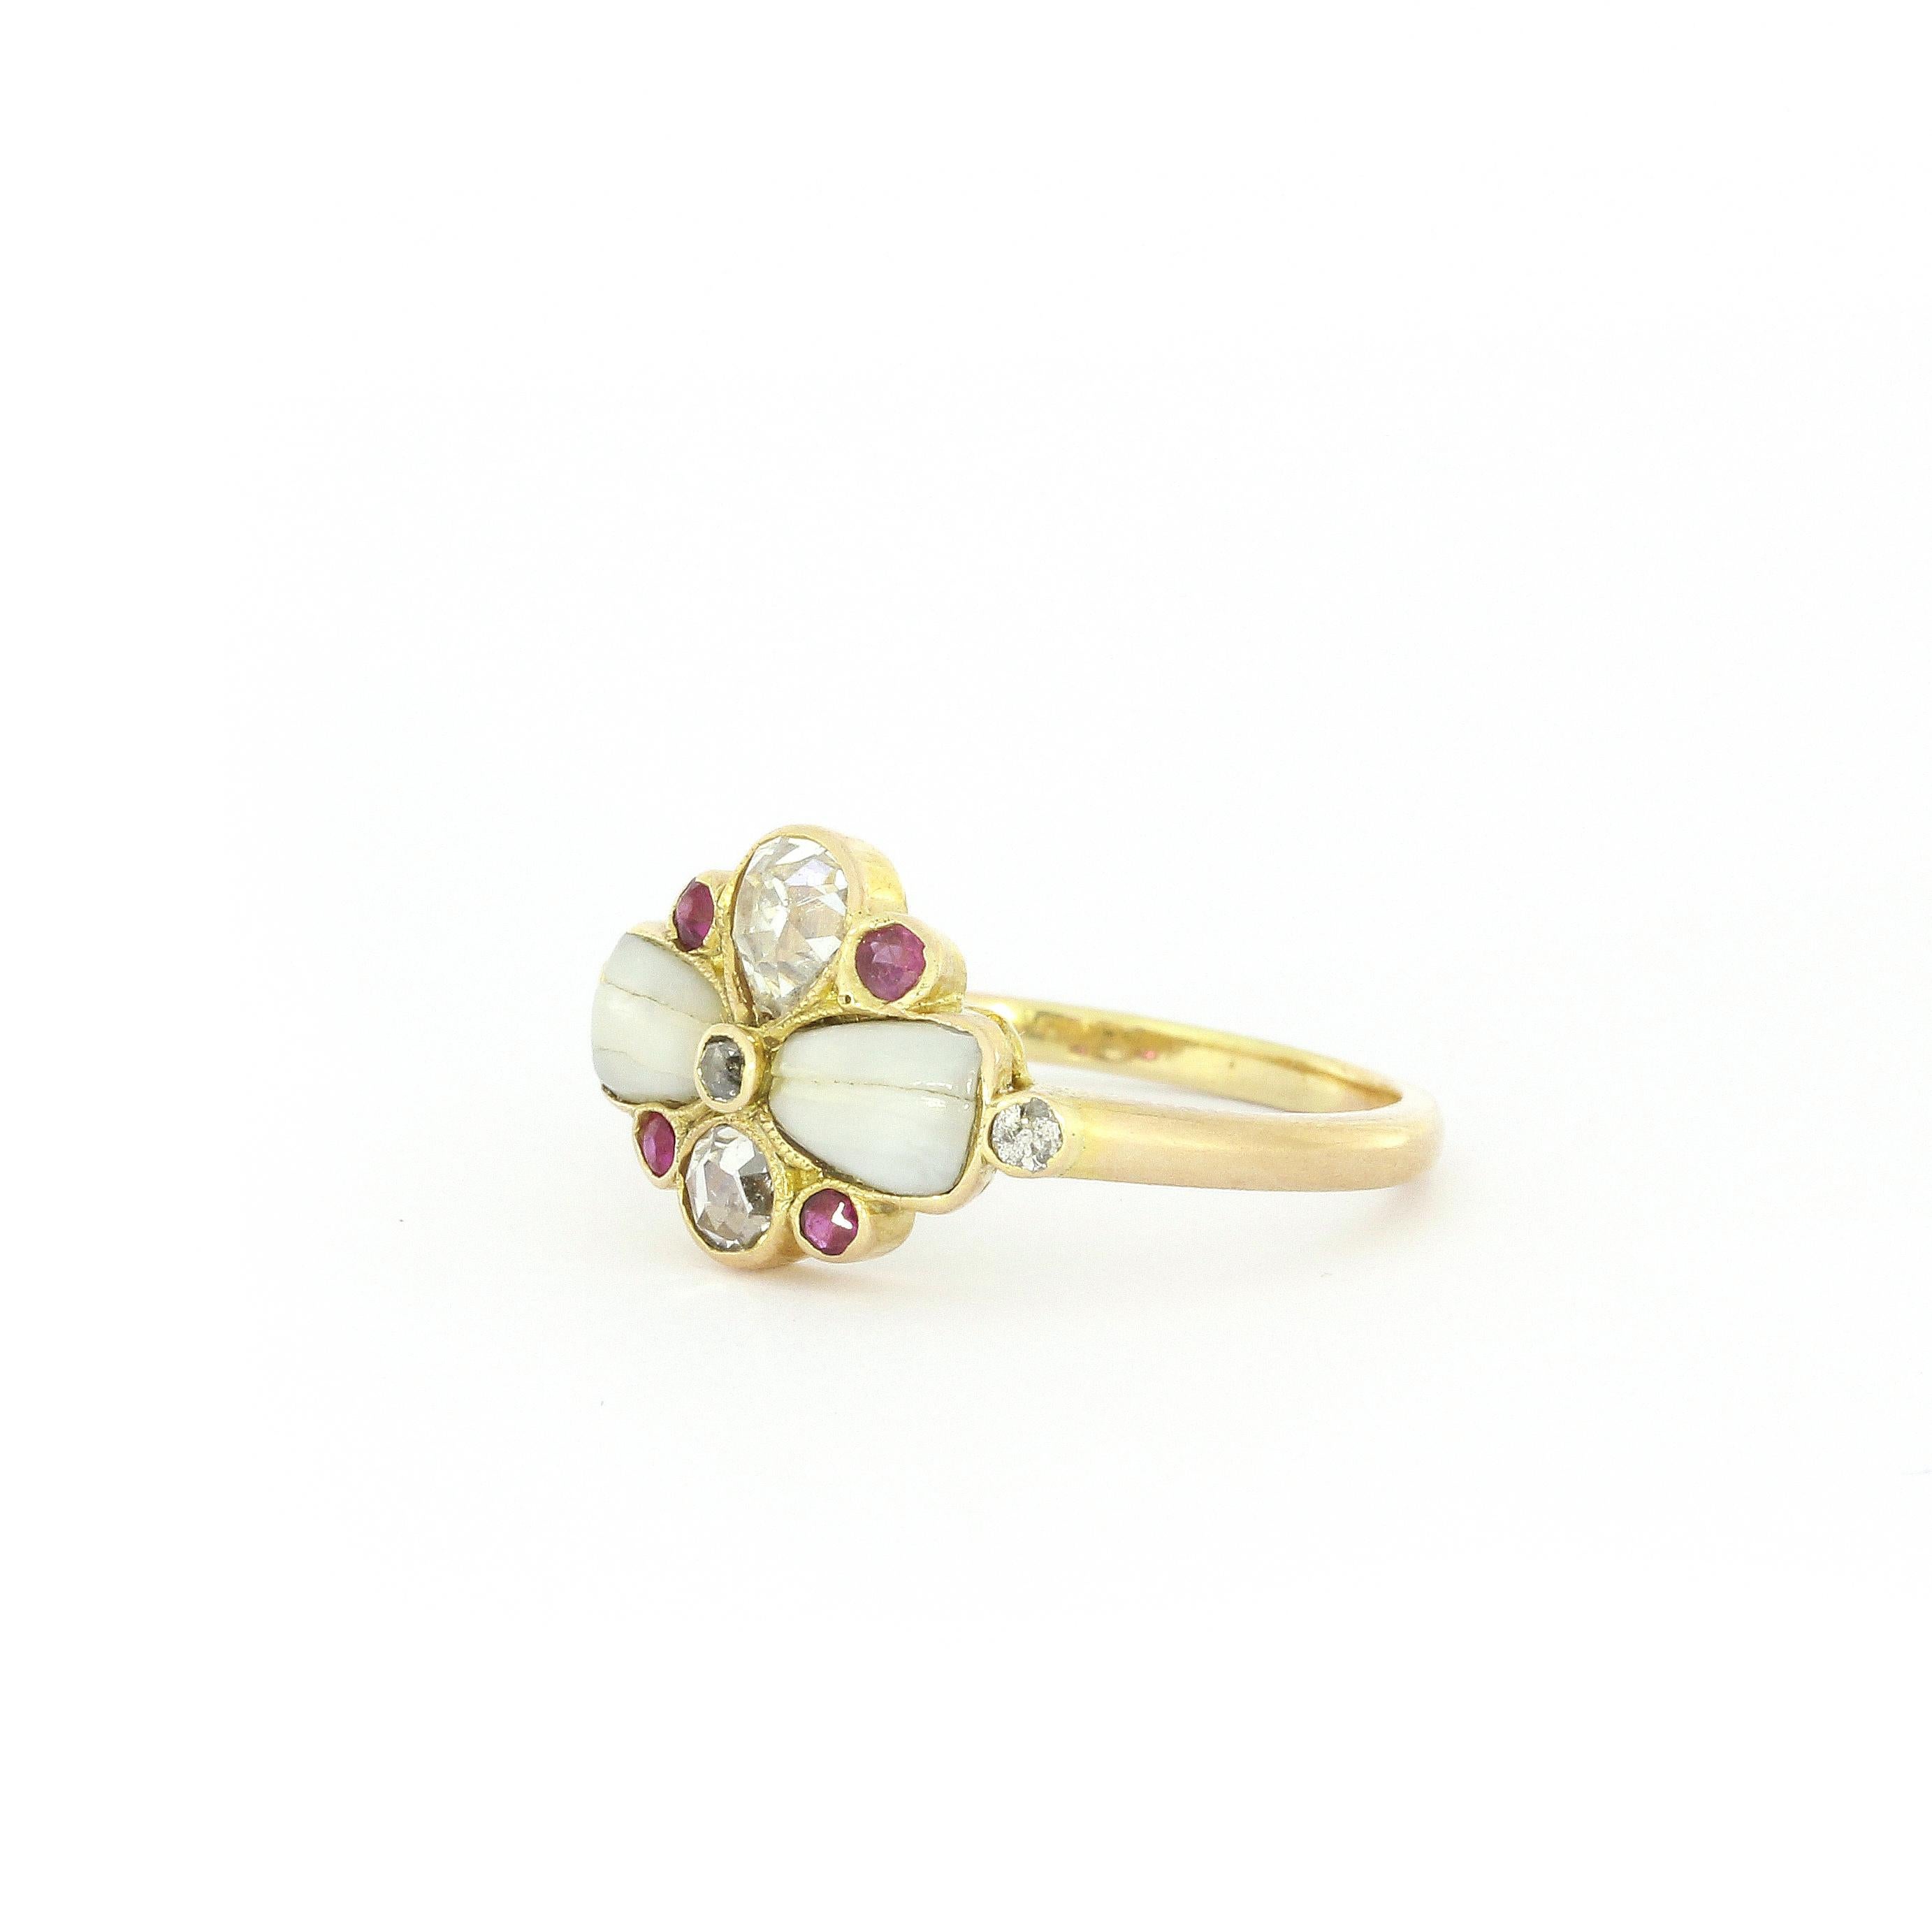 Art Nouveau Floral Diamond Ruby Ring In Yellow Gold
5 Diamonds ca. 0,52ct + four little rubies + two possible opal stones

Measurements
L: 11mm
W: 17mm
H: 5mm